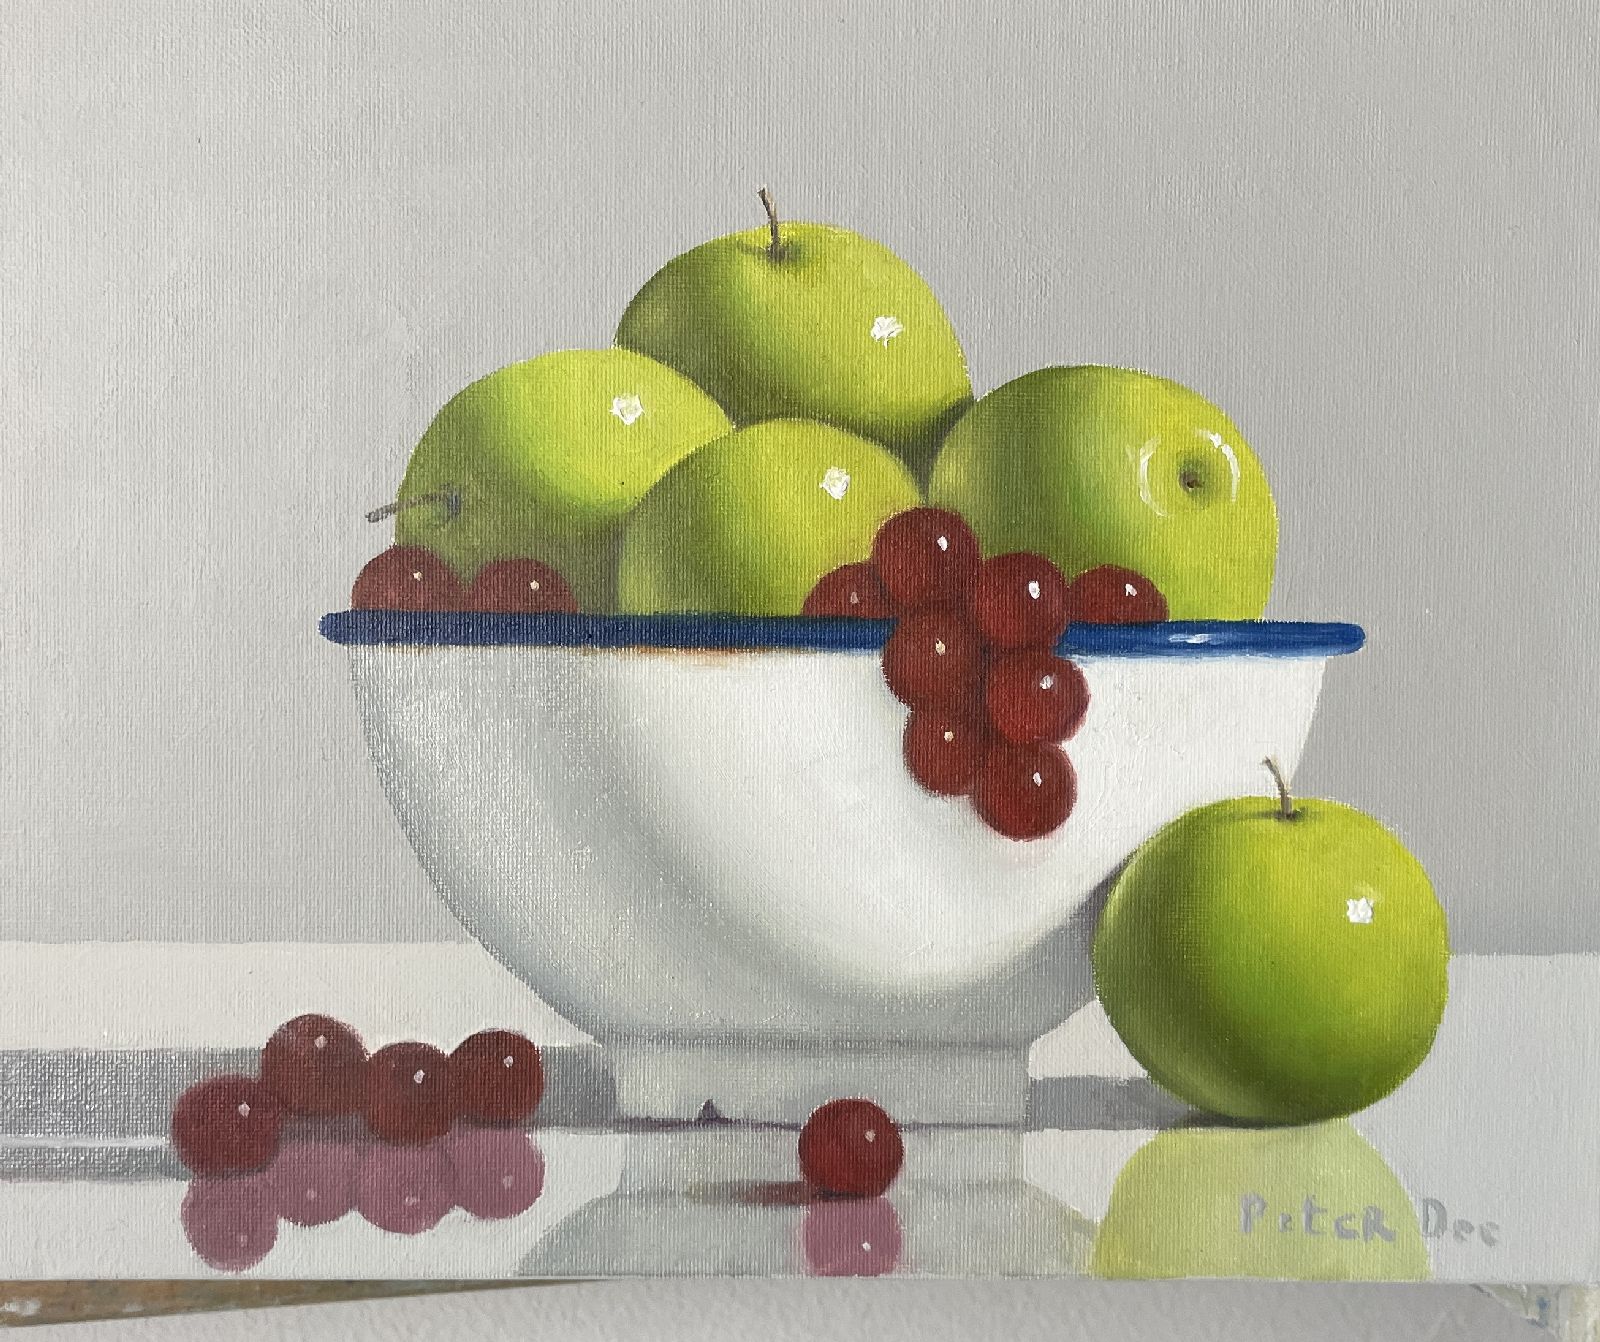 Bowl of apples and grapes by Peter Dee